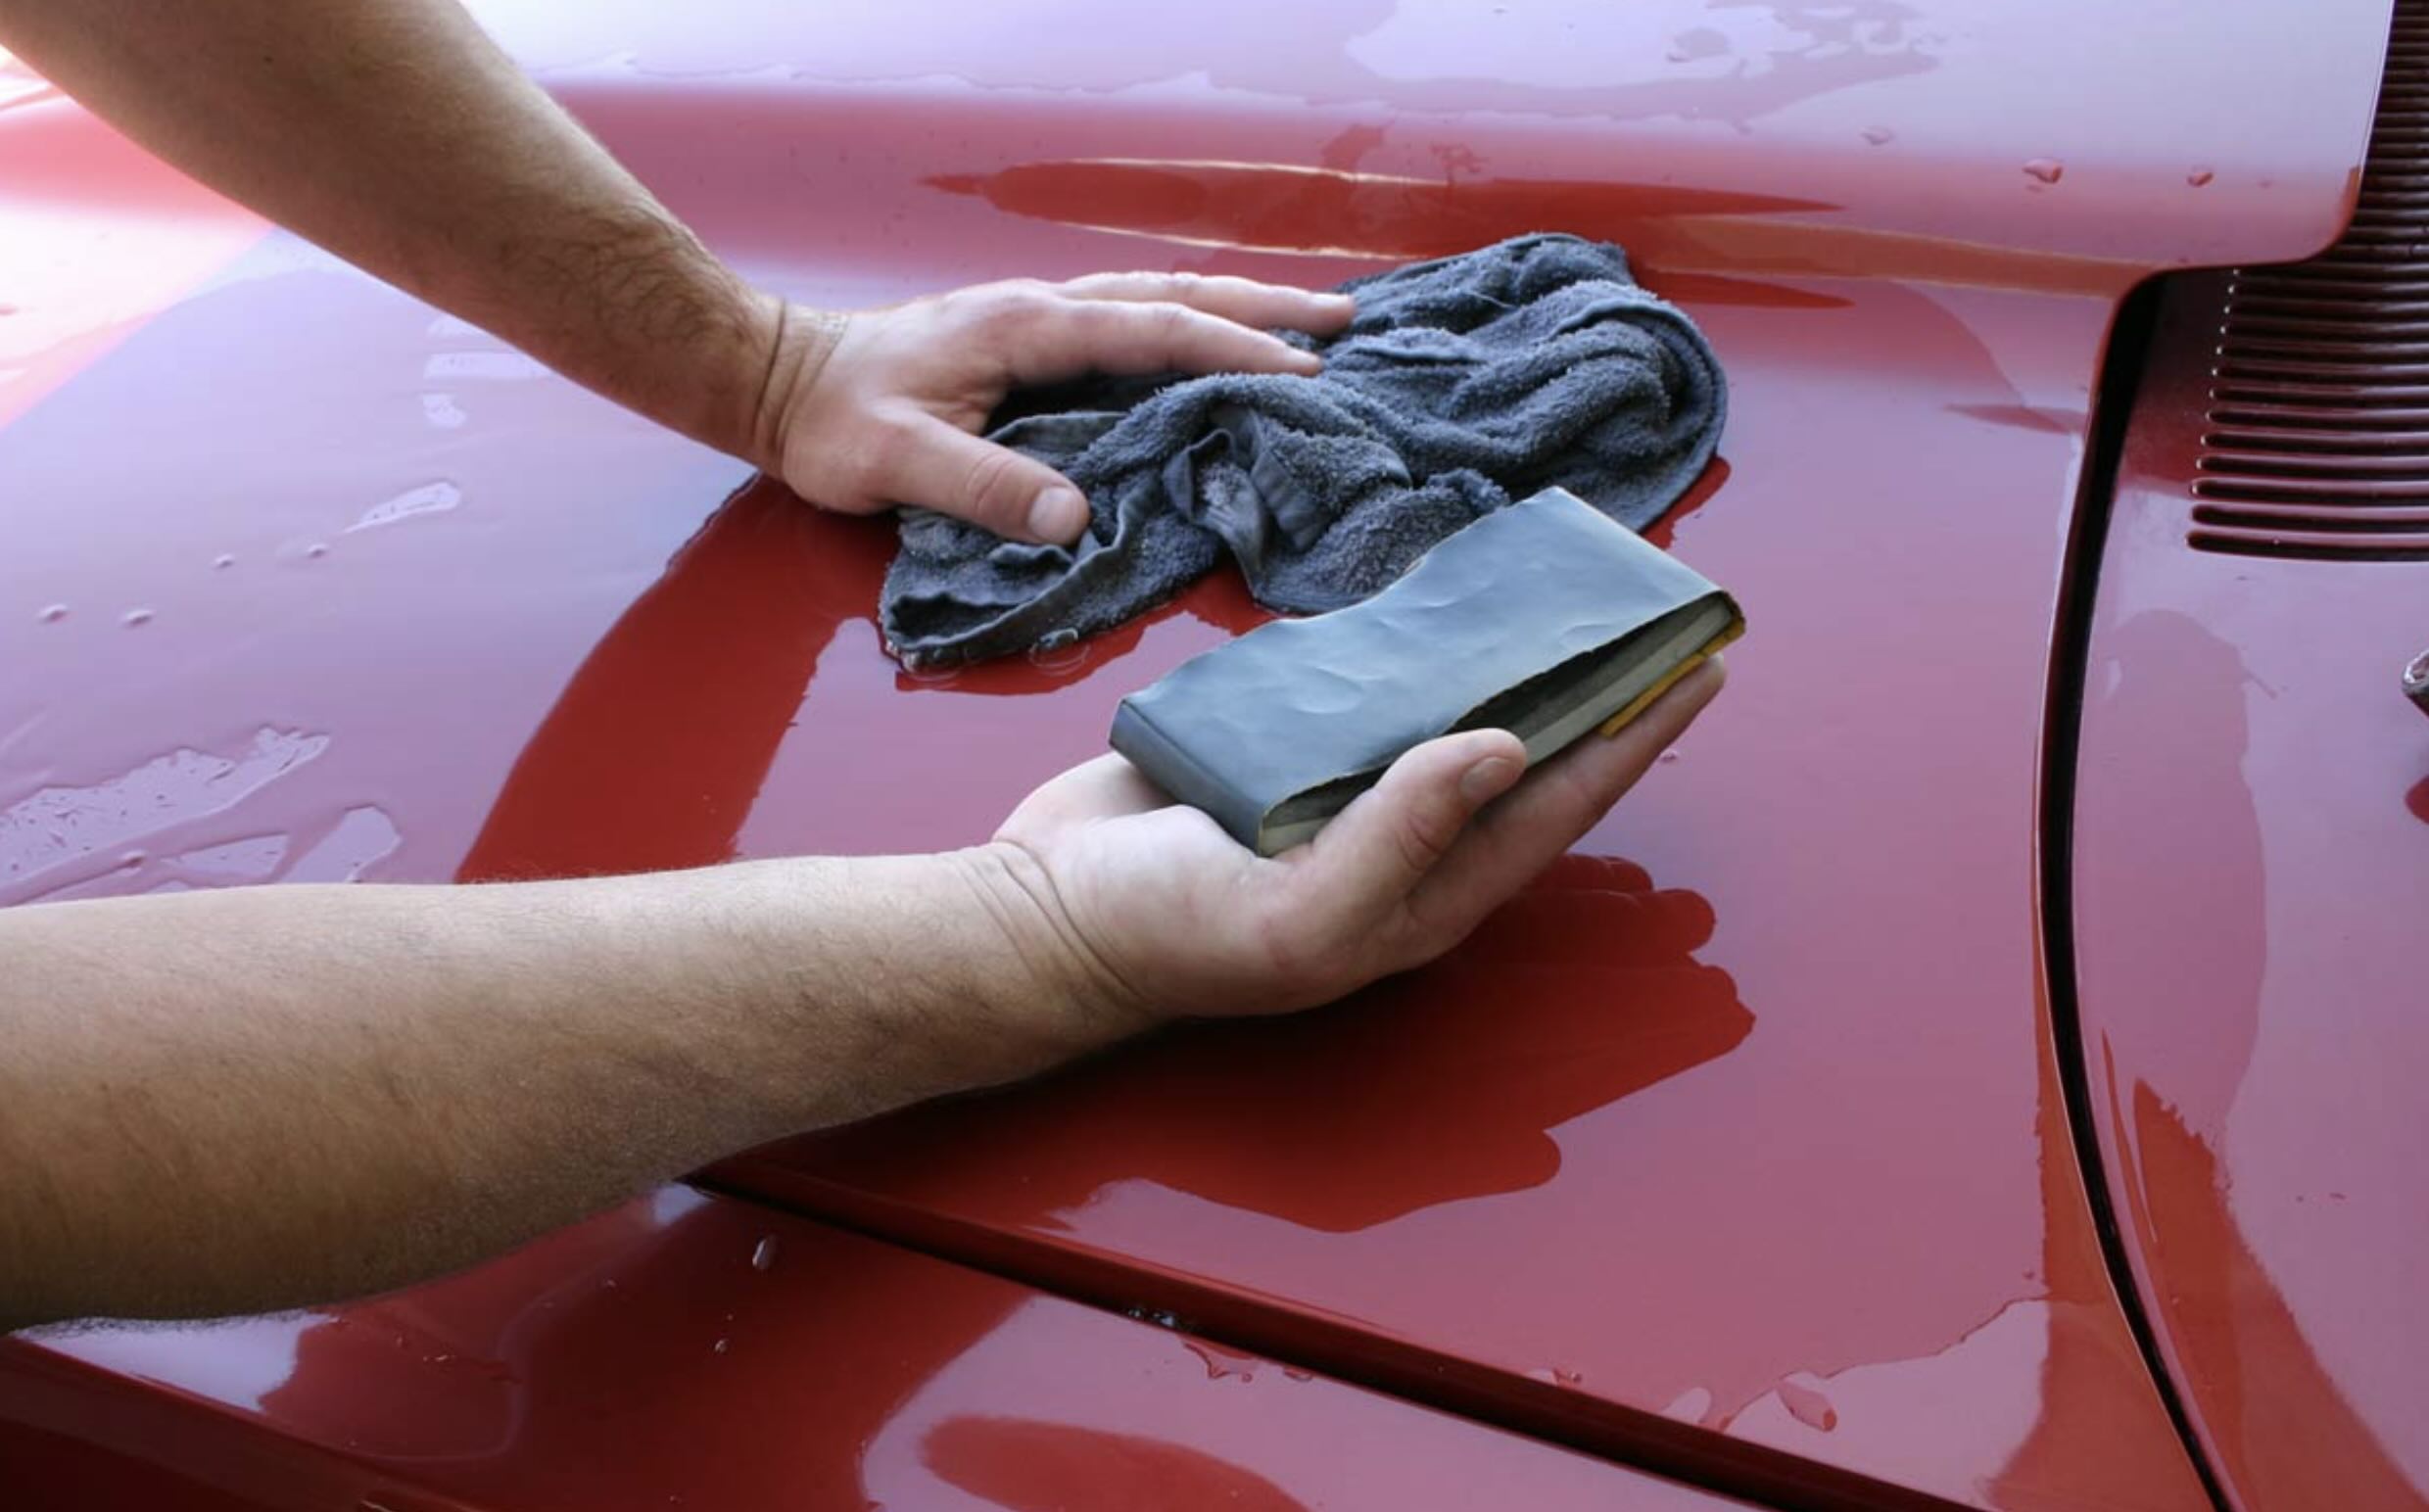 What Grit Sandpaper To Remove Paint From Car